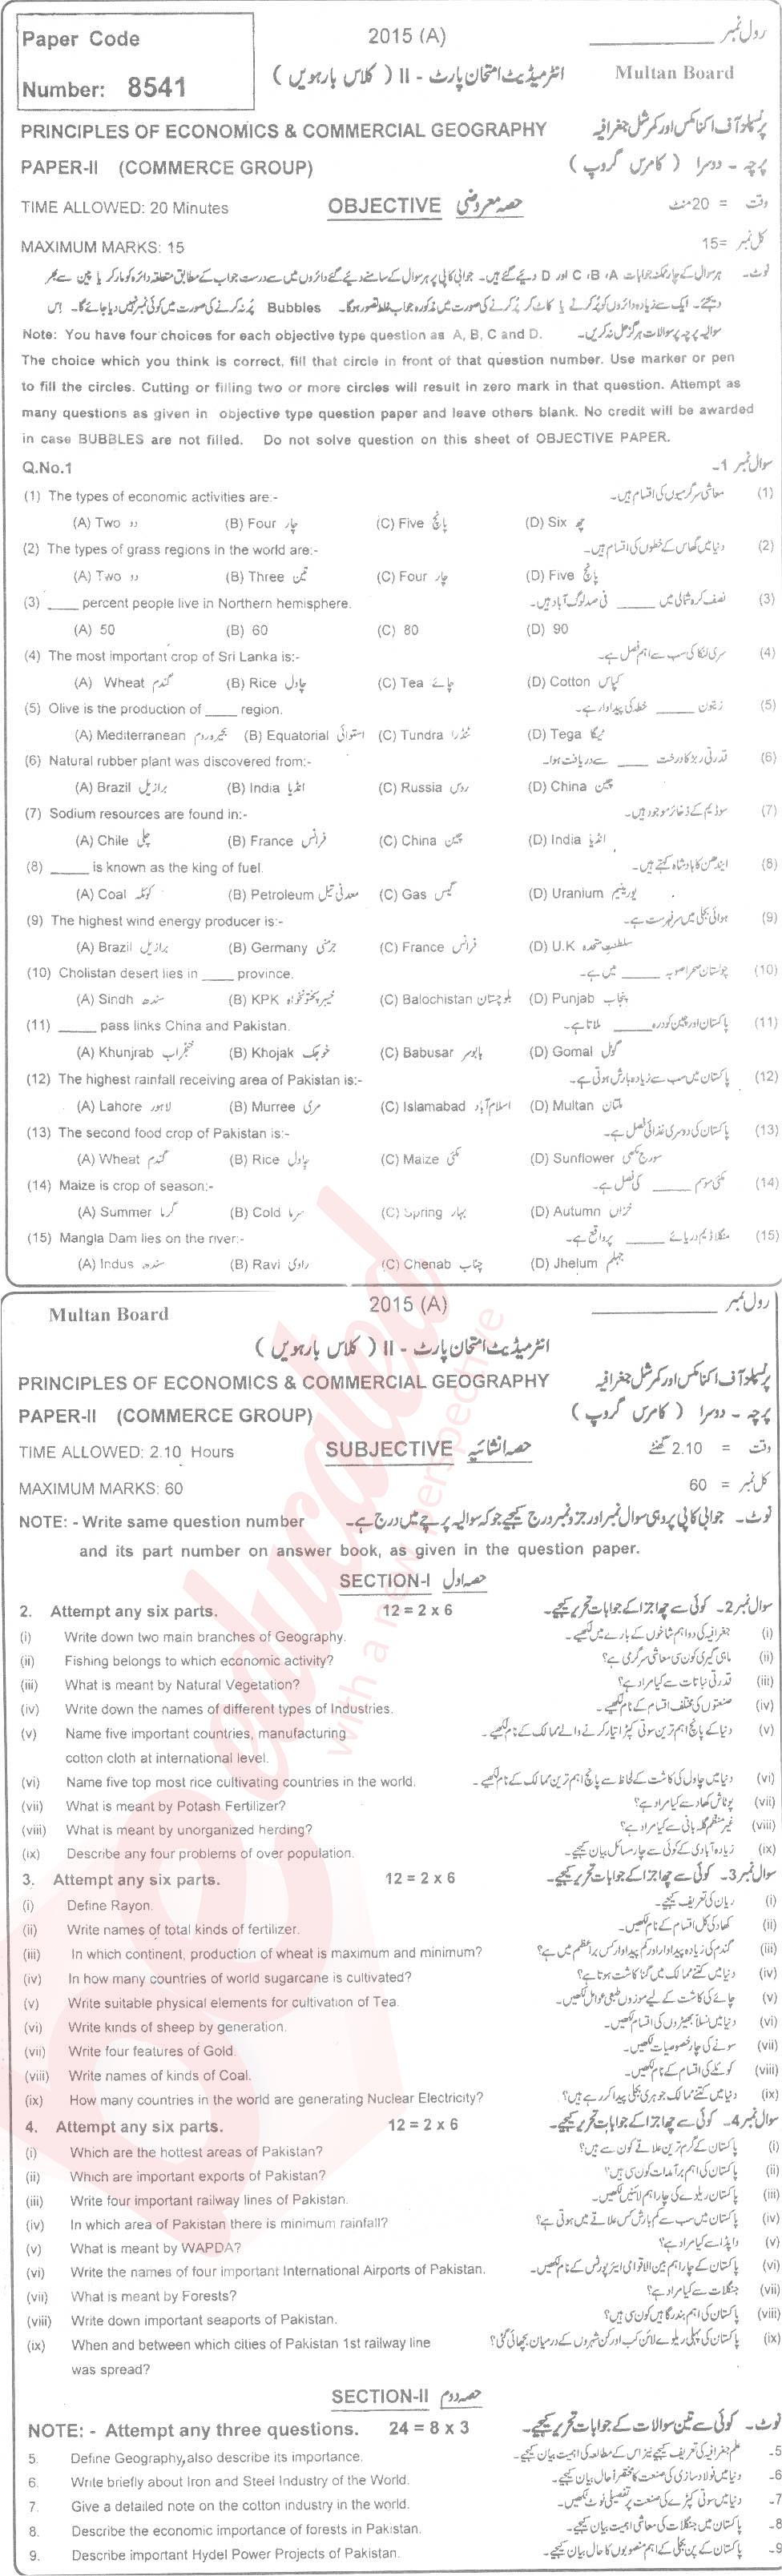 Commercial Geography ICOM Part 2 Past Paper Group 1 BISE Multan 2015